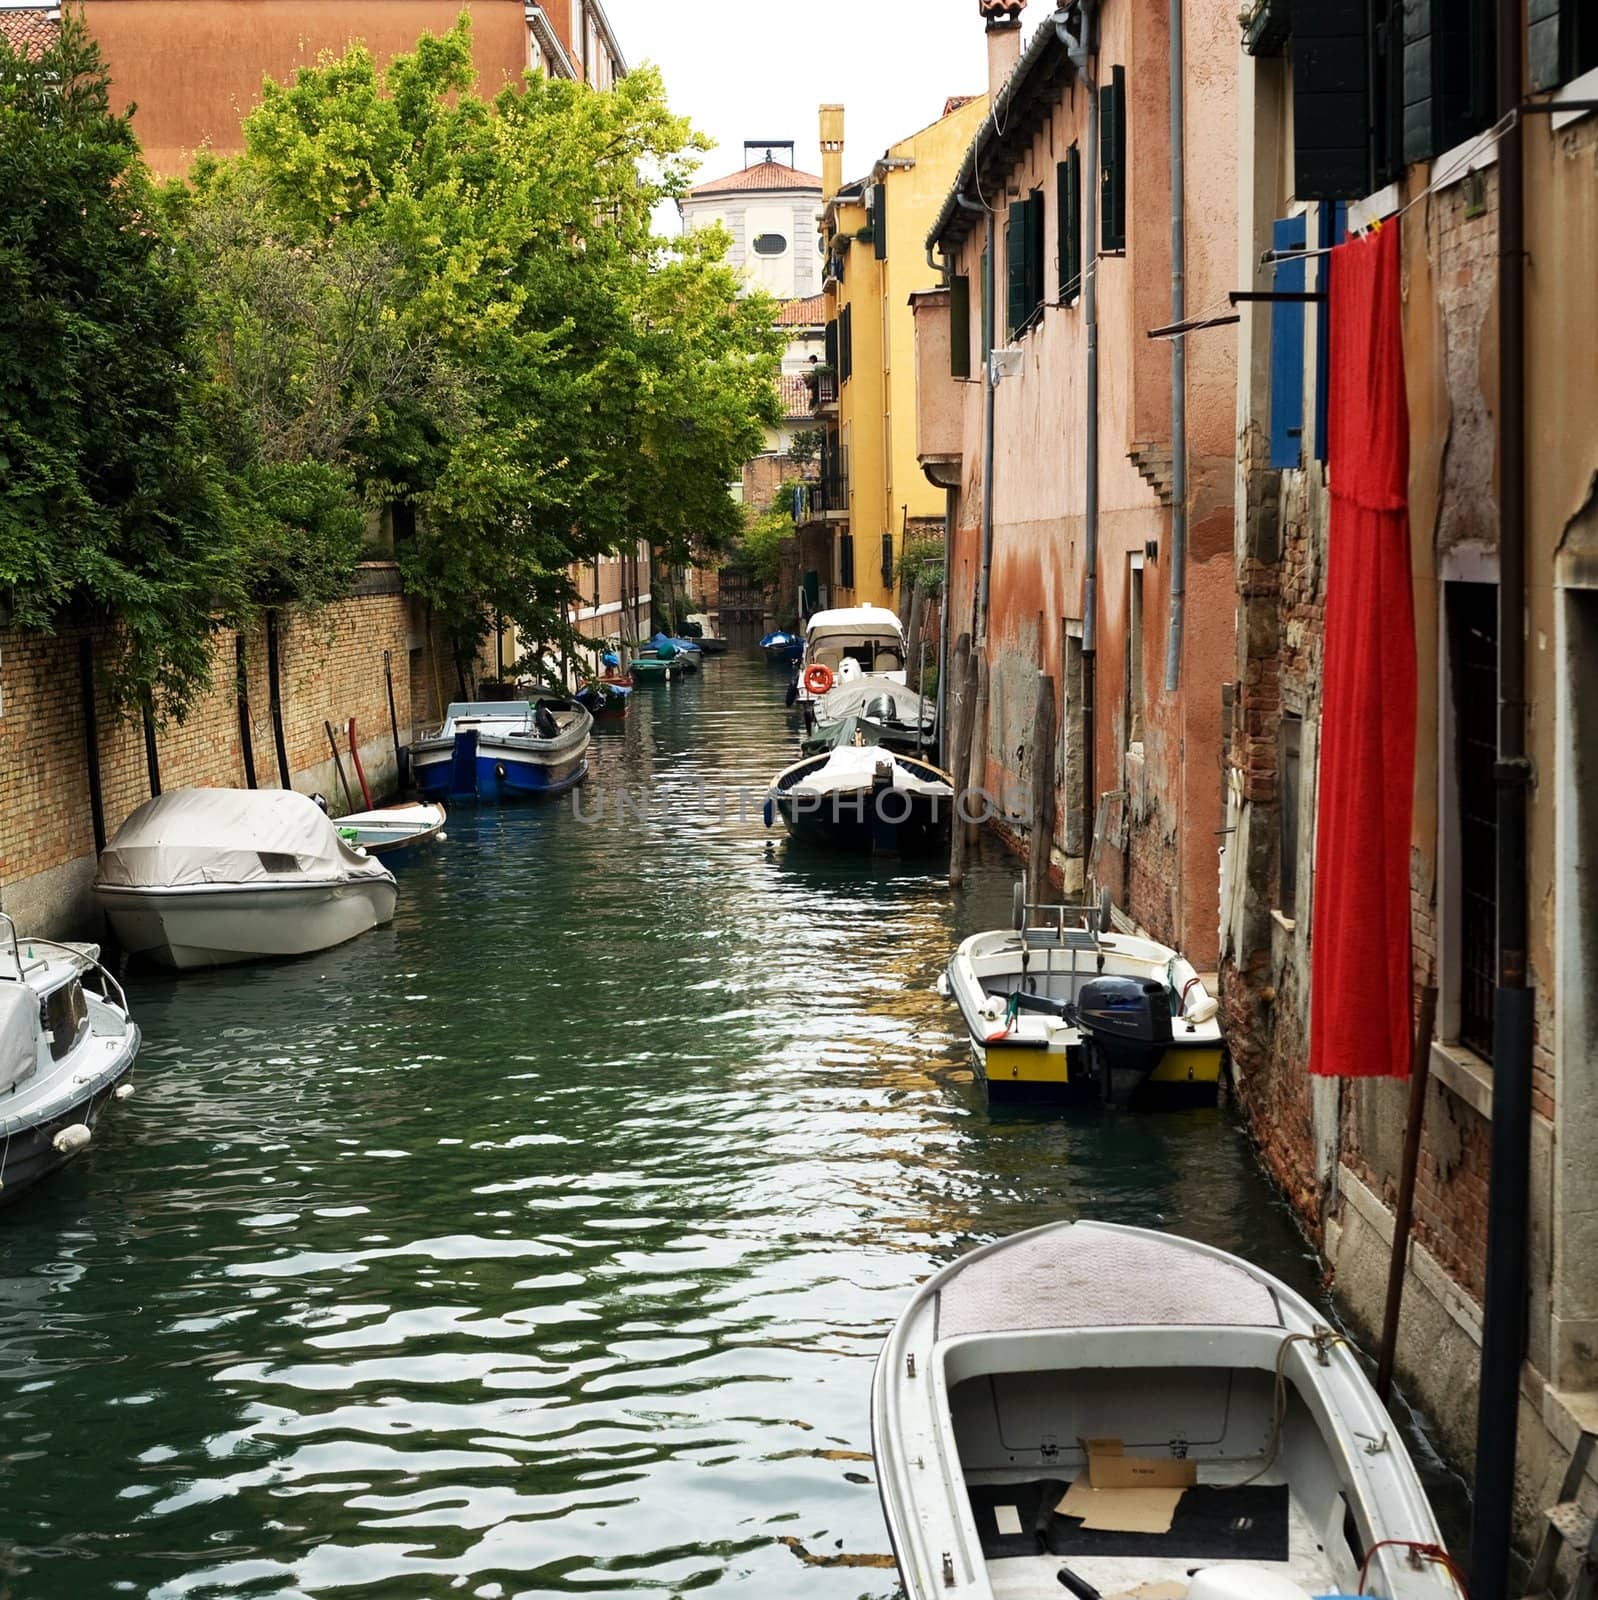 An image of a canal with boat in Venice